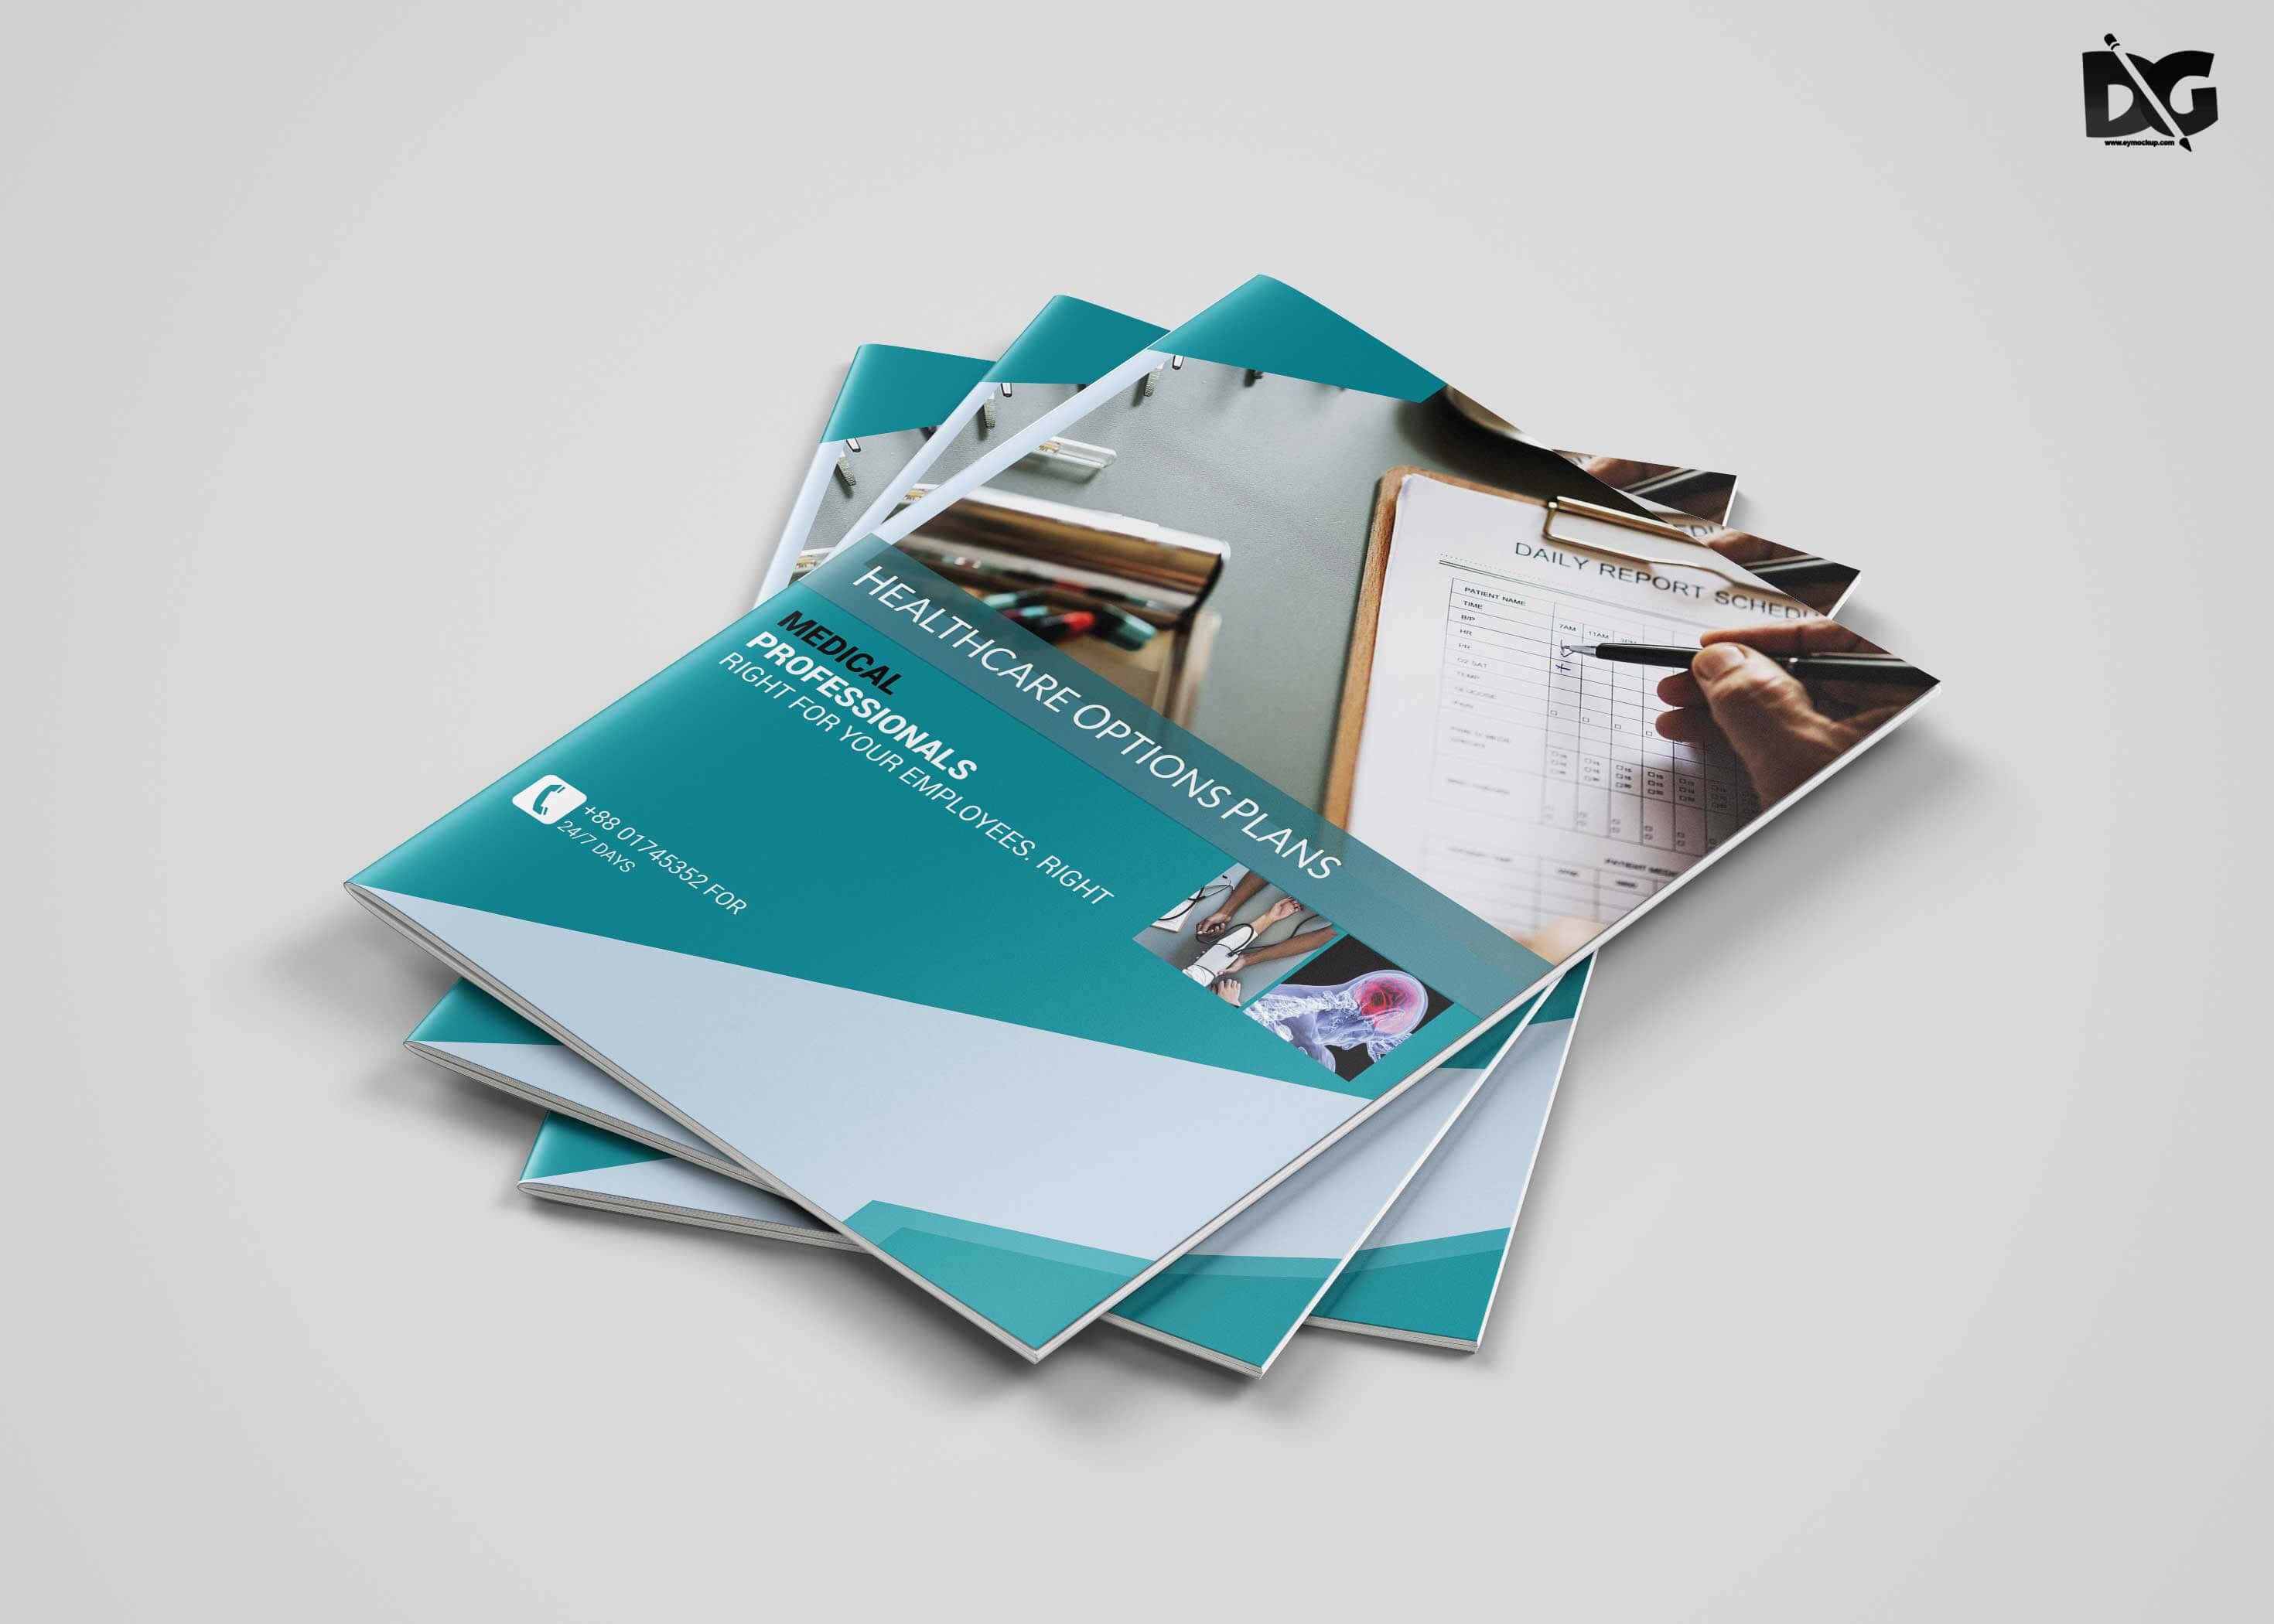 Free Download Health Care A4 Brochure Template | Free Psd Mockup Intended For Healthcare Brochure Templates Free Download